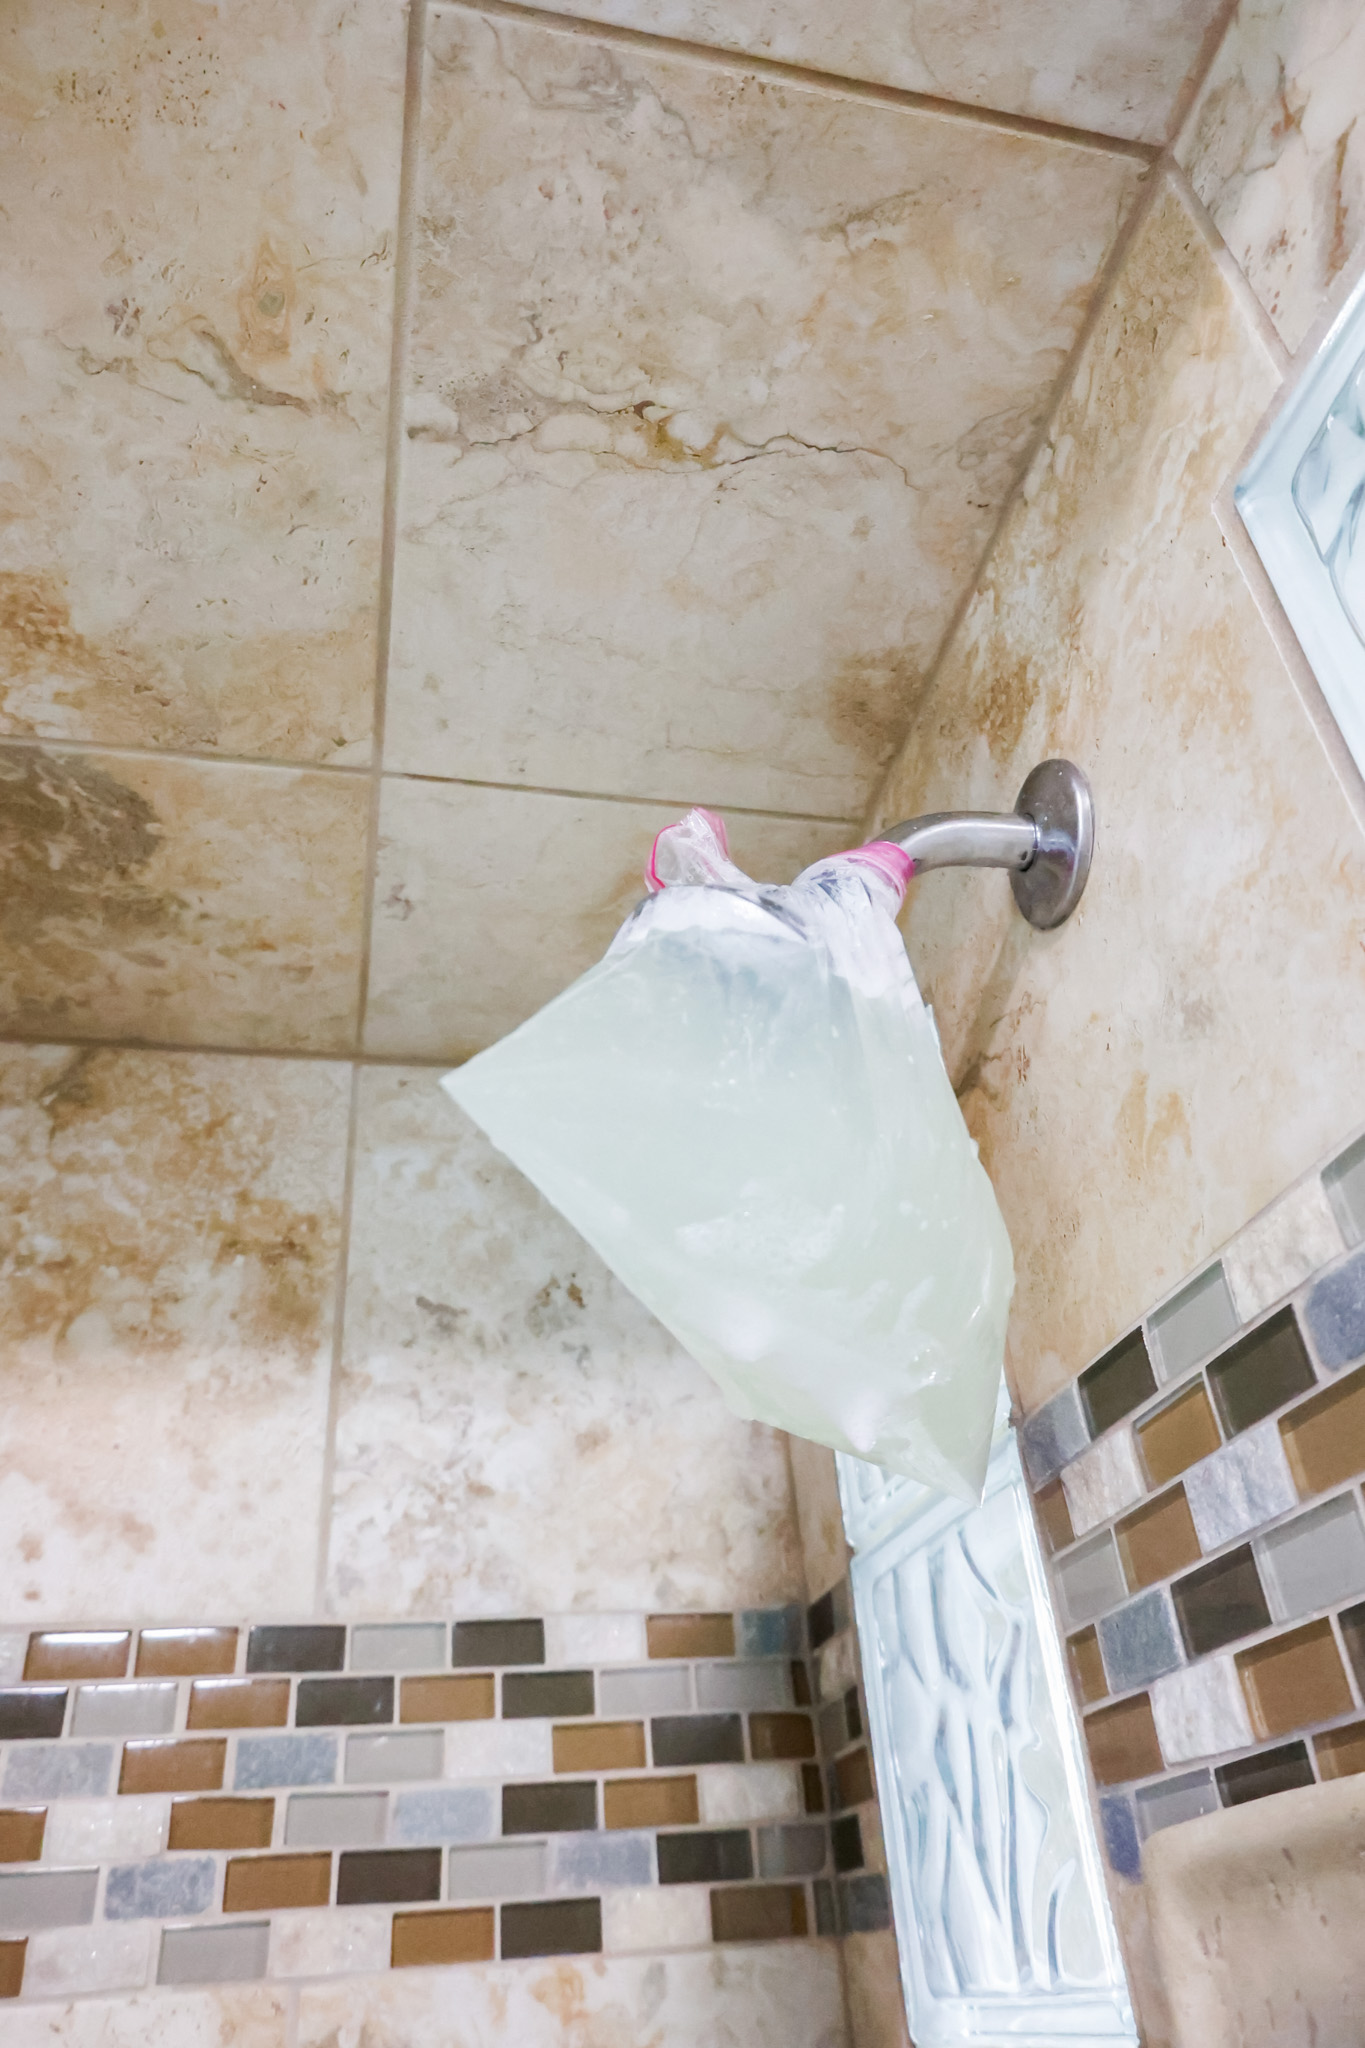 vertical shot of bag shown fastened to showerhead